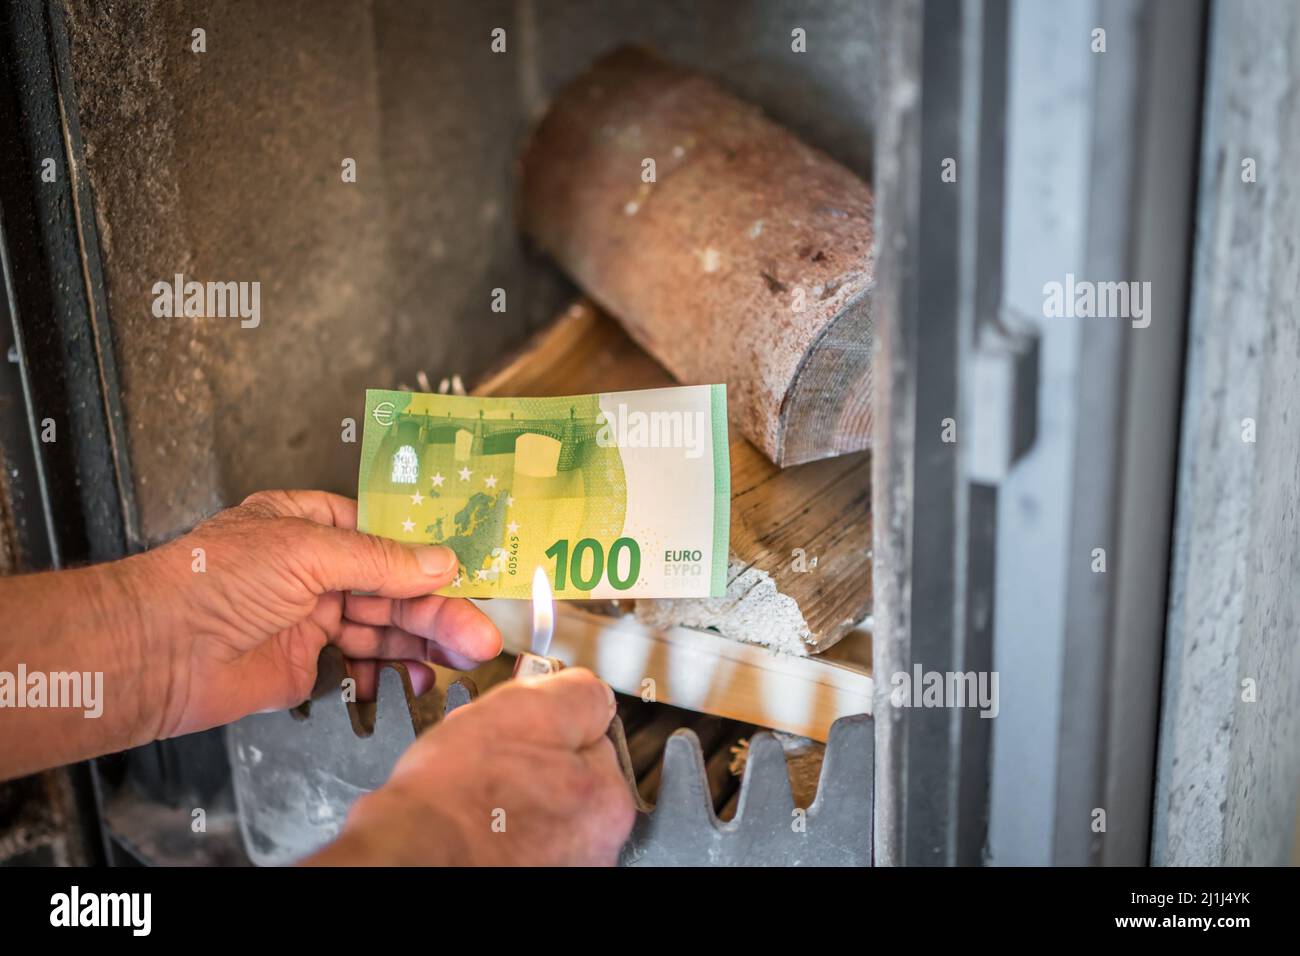 Old pensioner man holding banknotes in hand in front of wood stove with wood and burning lighter in an apartment, Germany Stock Photo